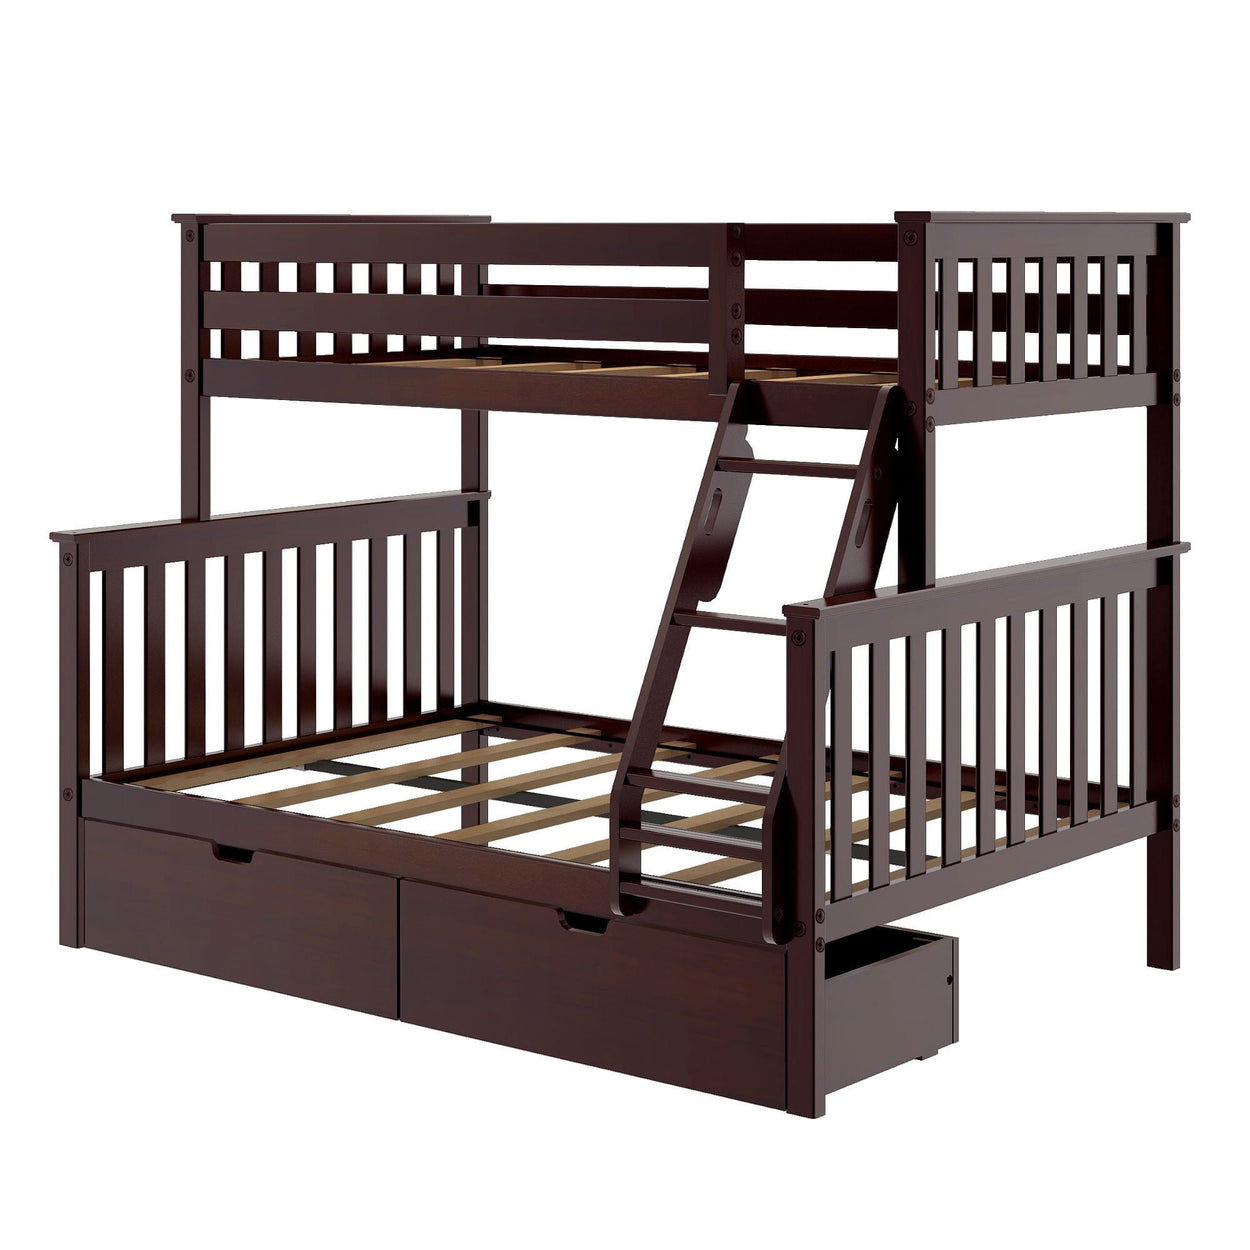 187231-005 : Bunk Beds Twin over Full Bunk Bed + Storage Drawers, Espresso